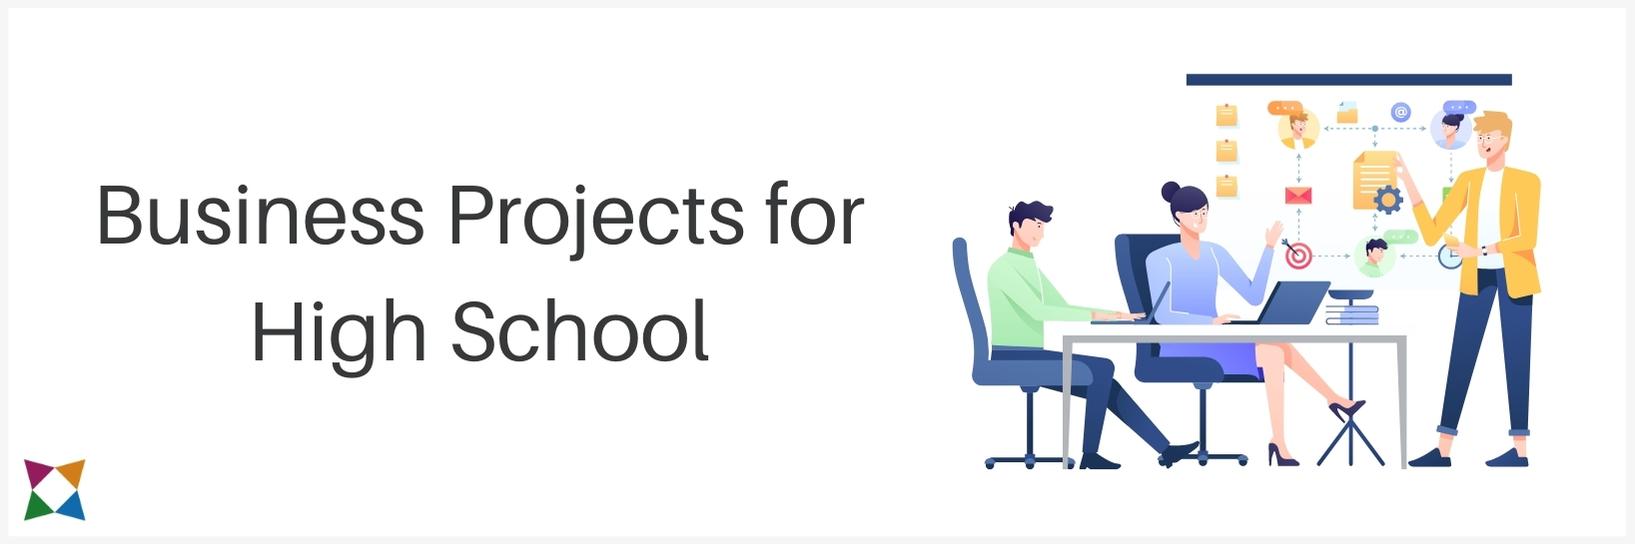 5 Top Business Projects for High School